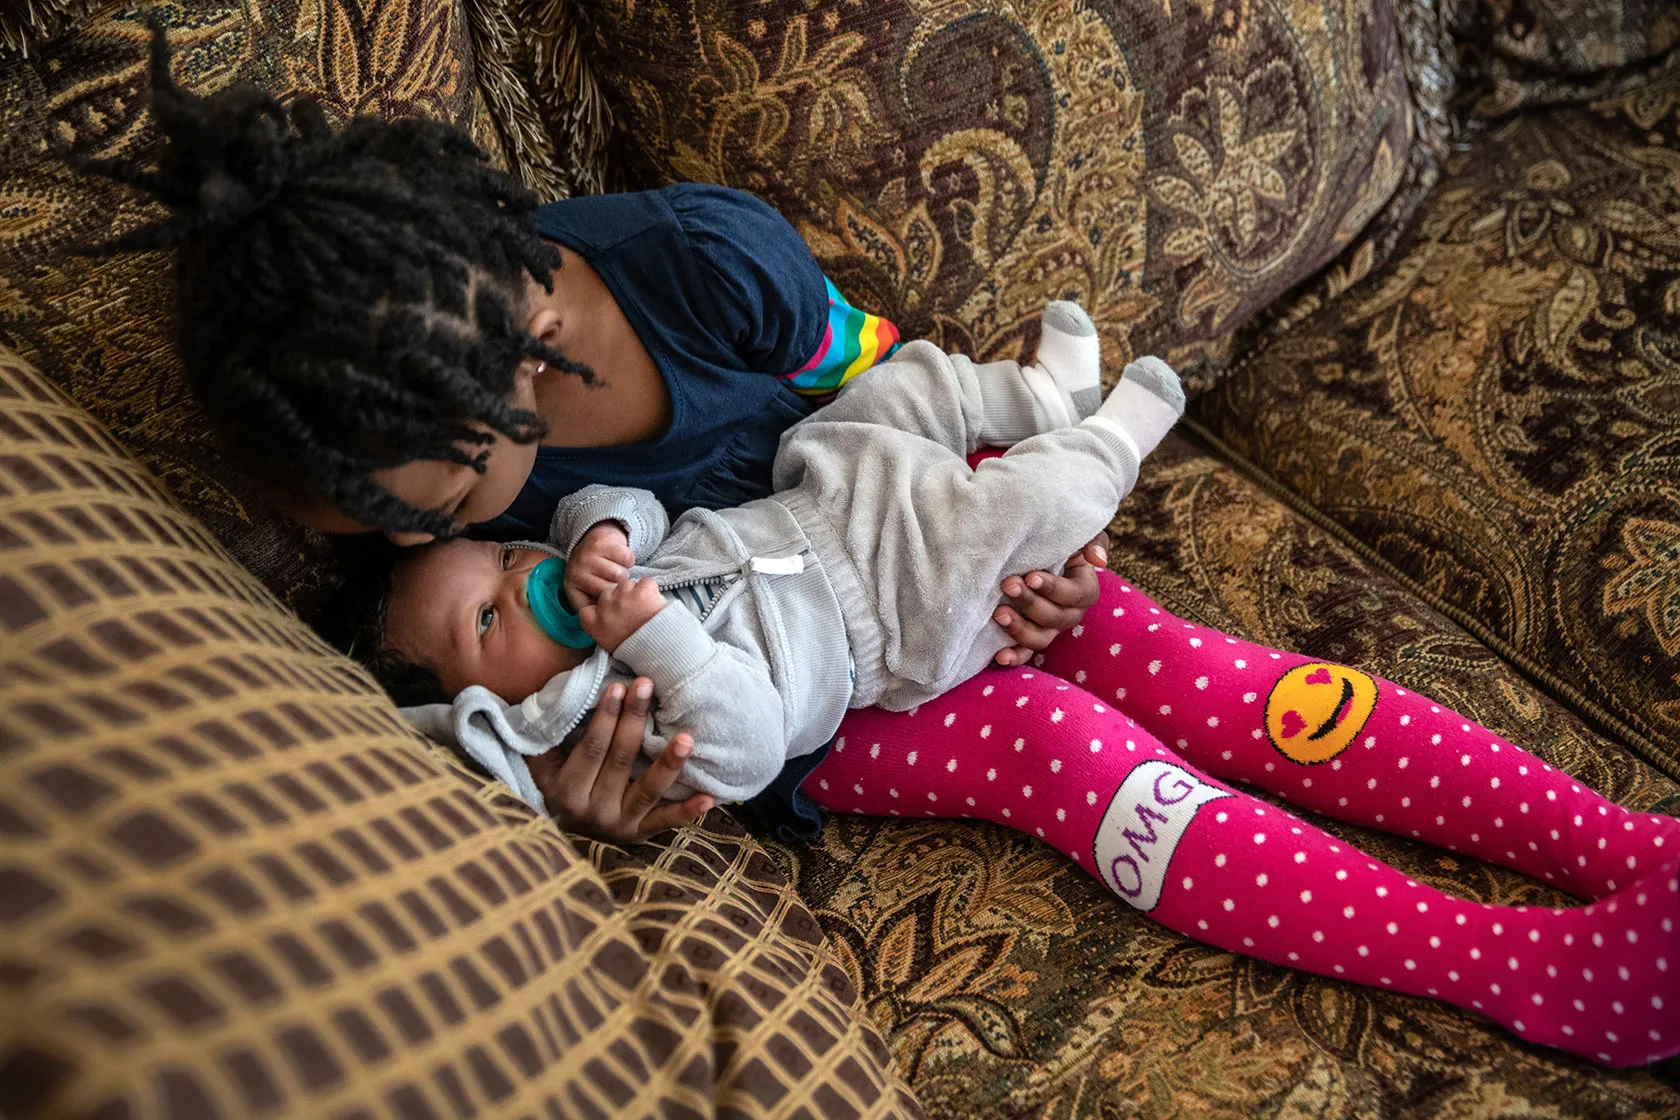 Photo shows a girl in pink stockings holding her baby brother and kissing his face on a multipatterned couch